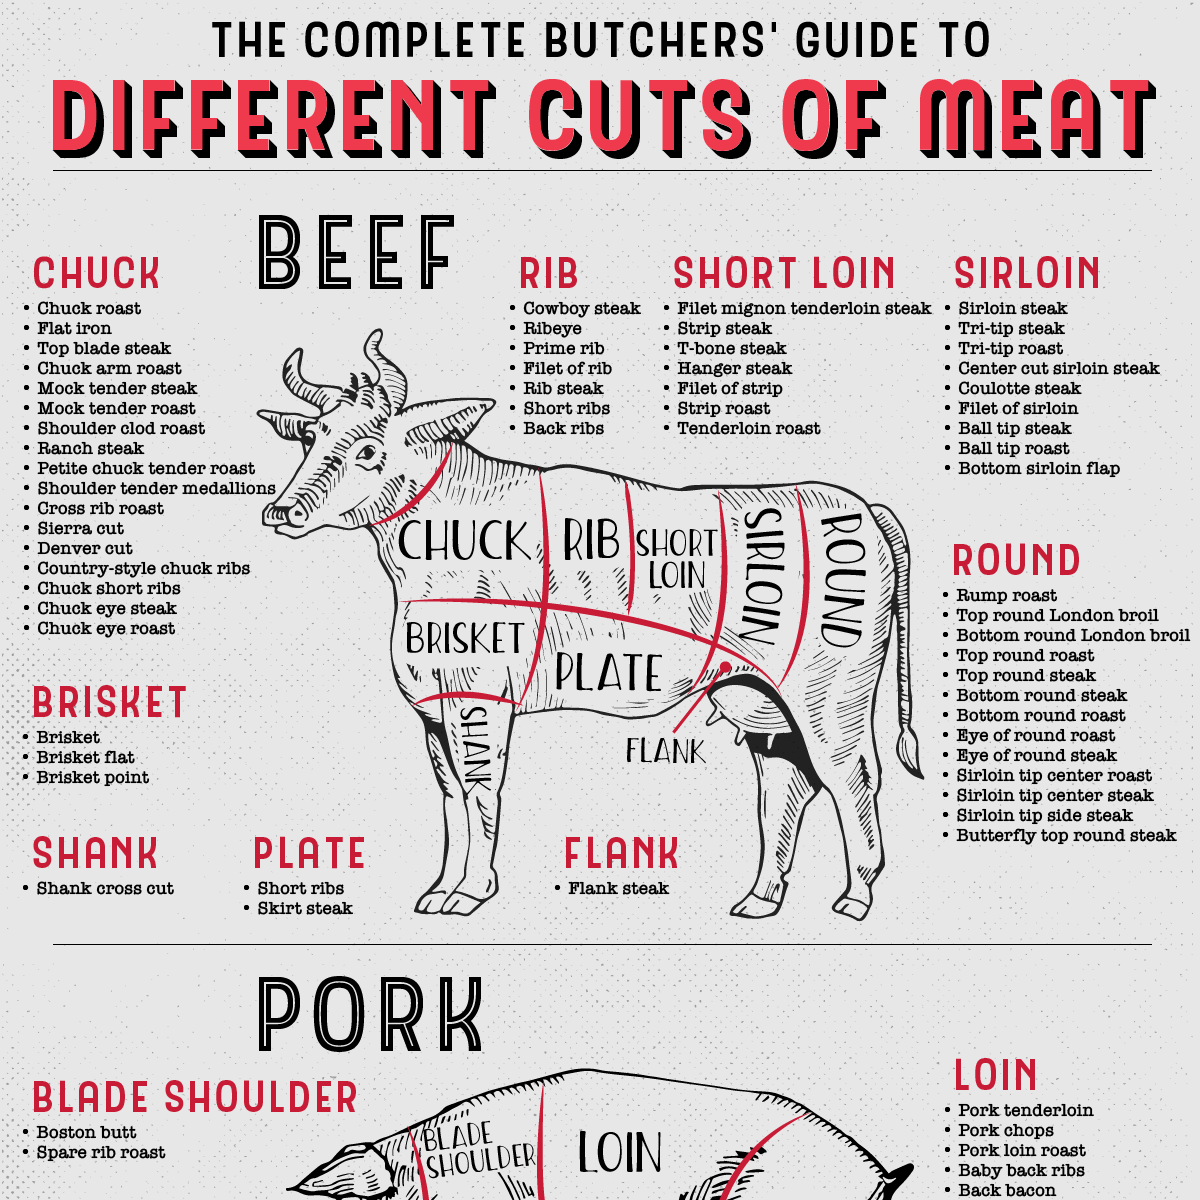 The Complete Butchers' Guide to Different Cuts of Meat | How To Cook